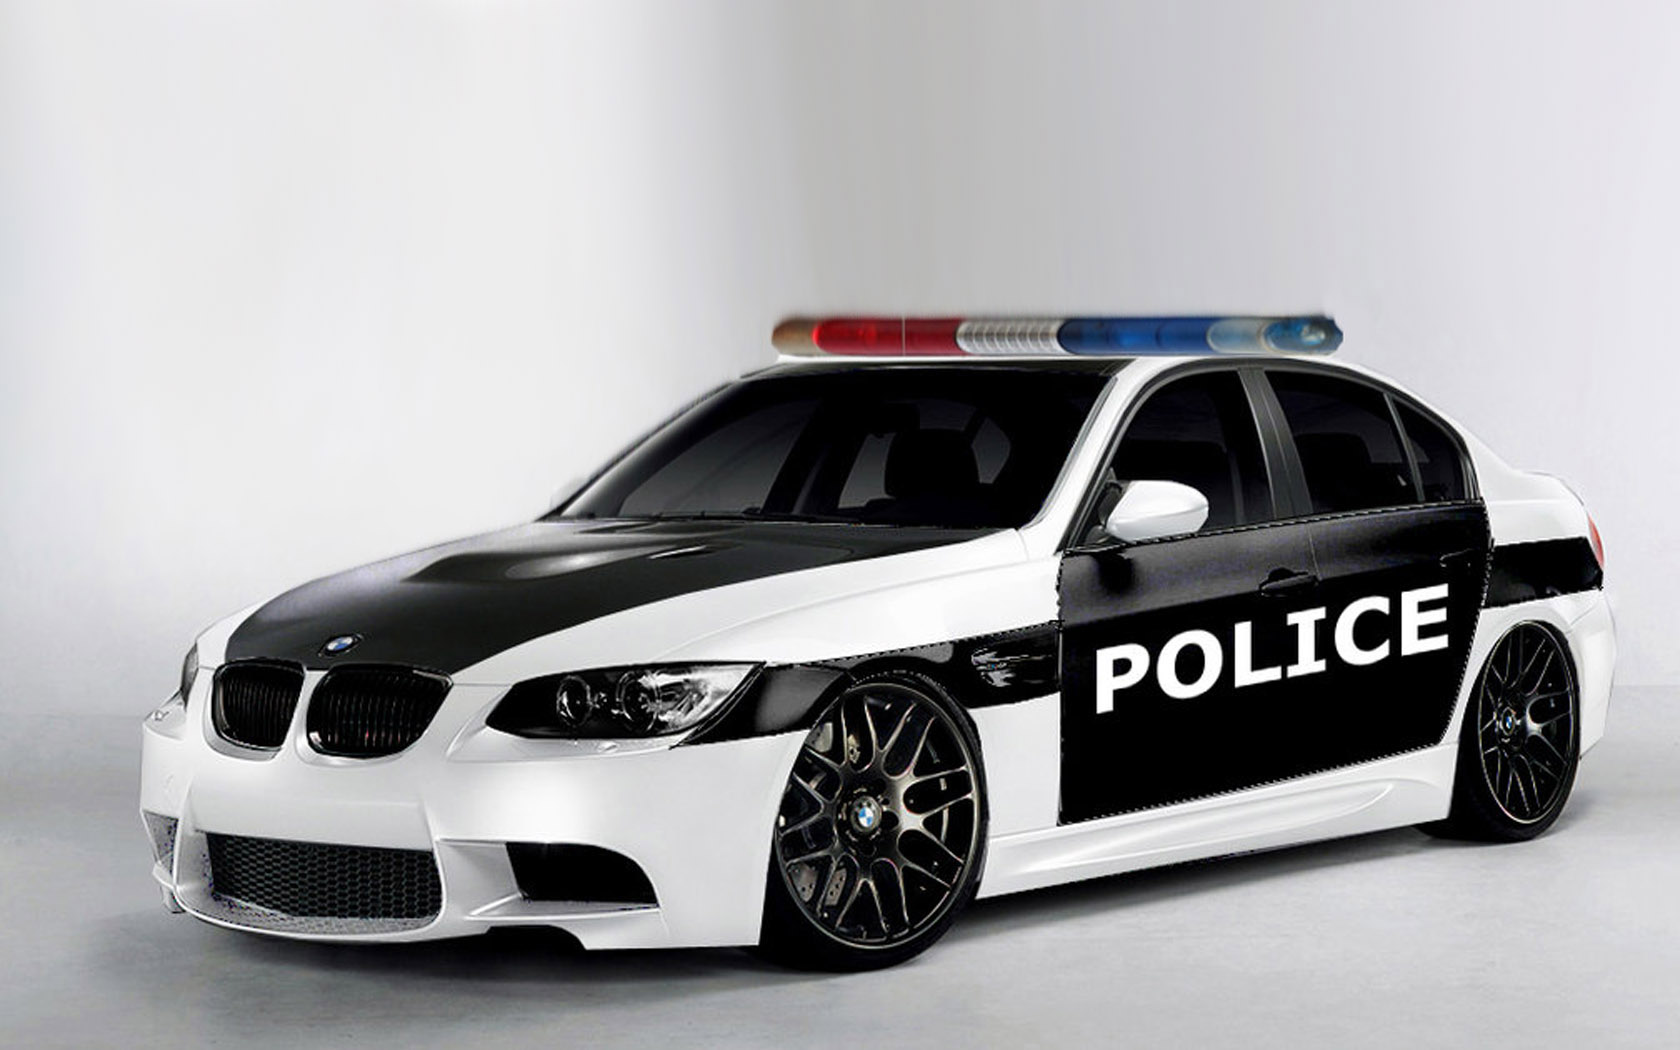 Police Car Wallpaper Bmw All About Gallery